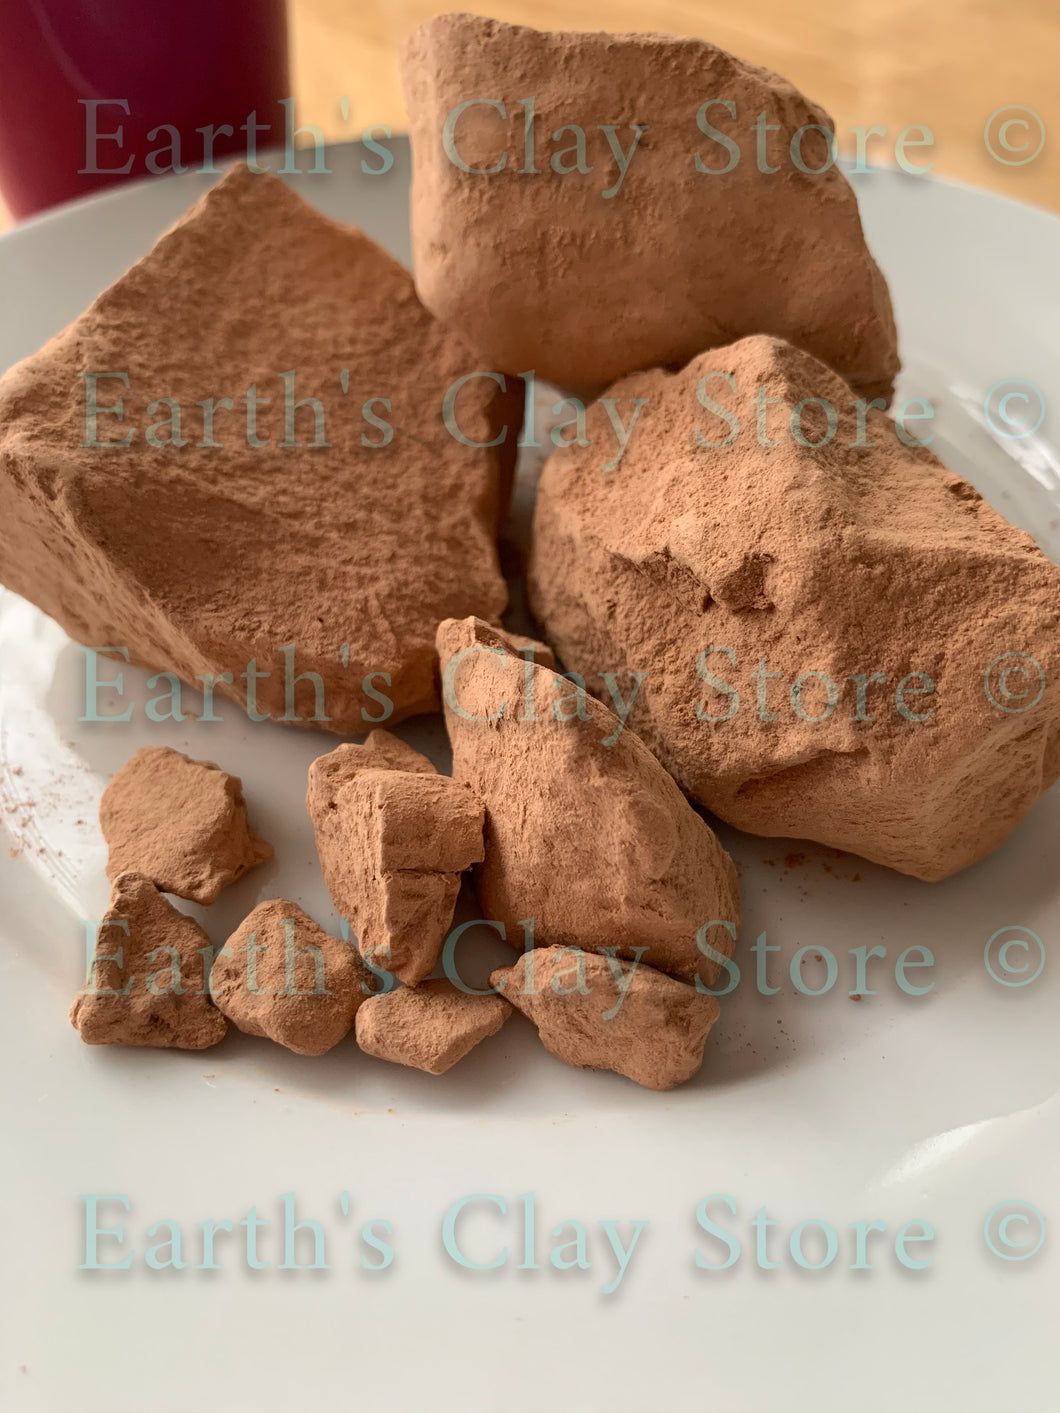 SA Butter Crèmes Clay now available - Earth's Clay Store